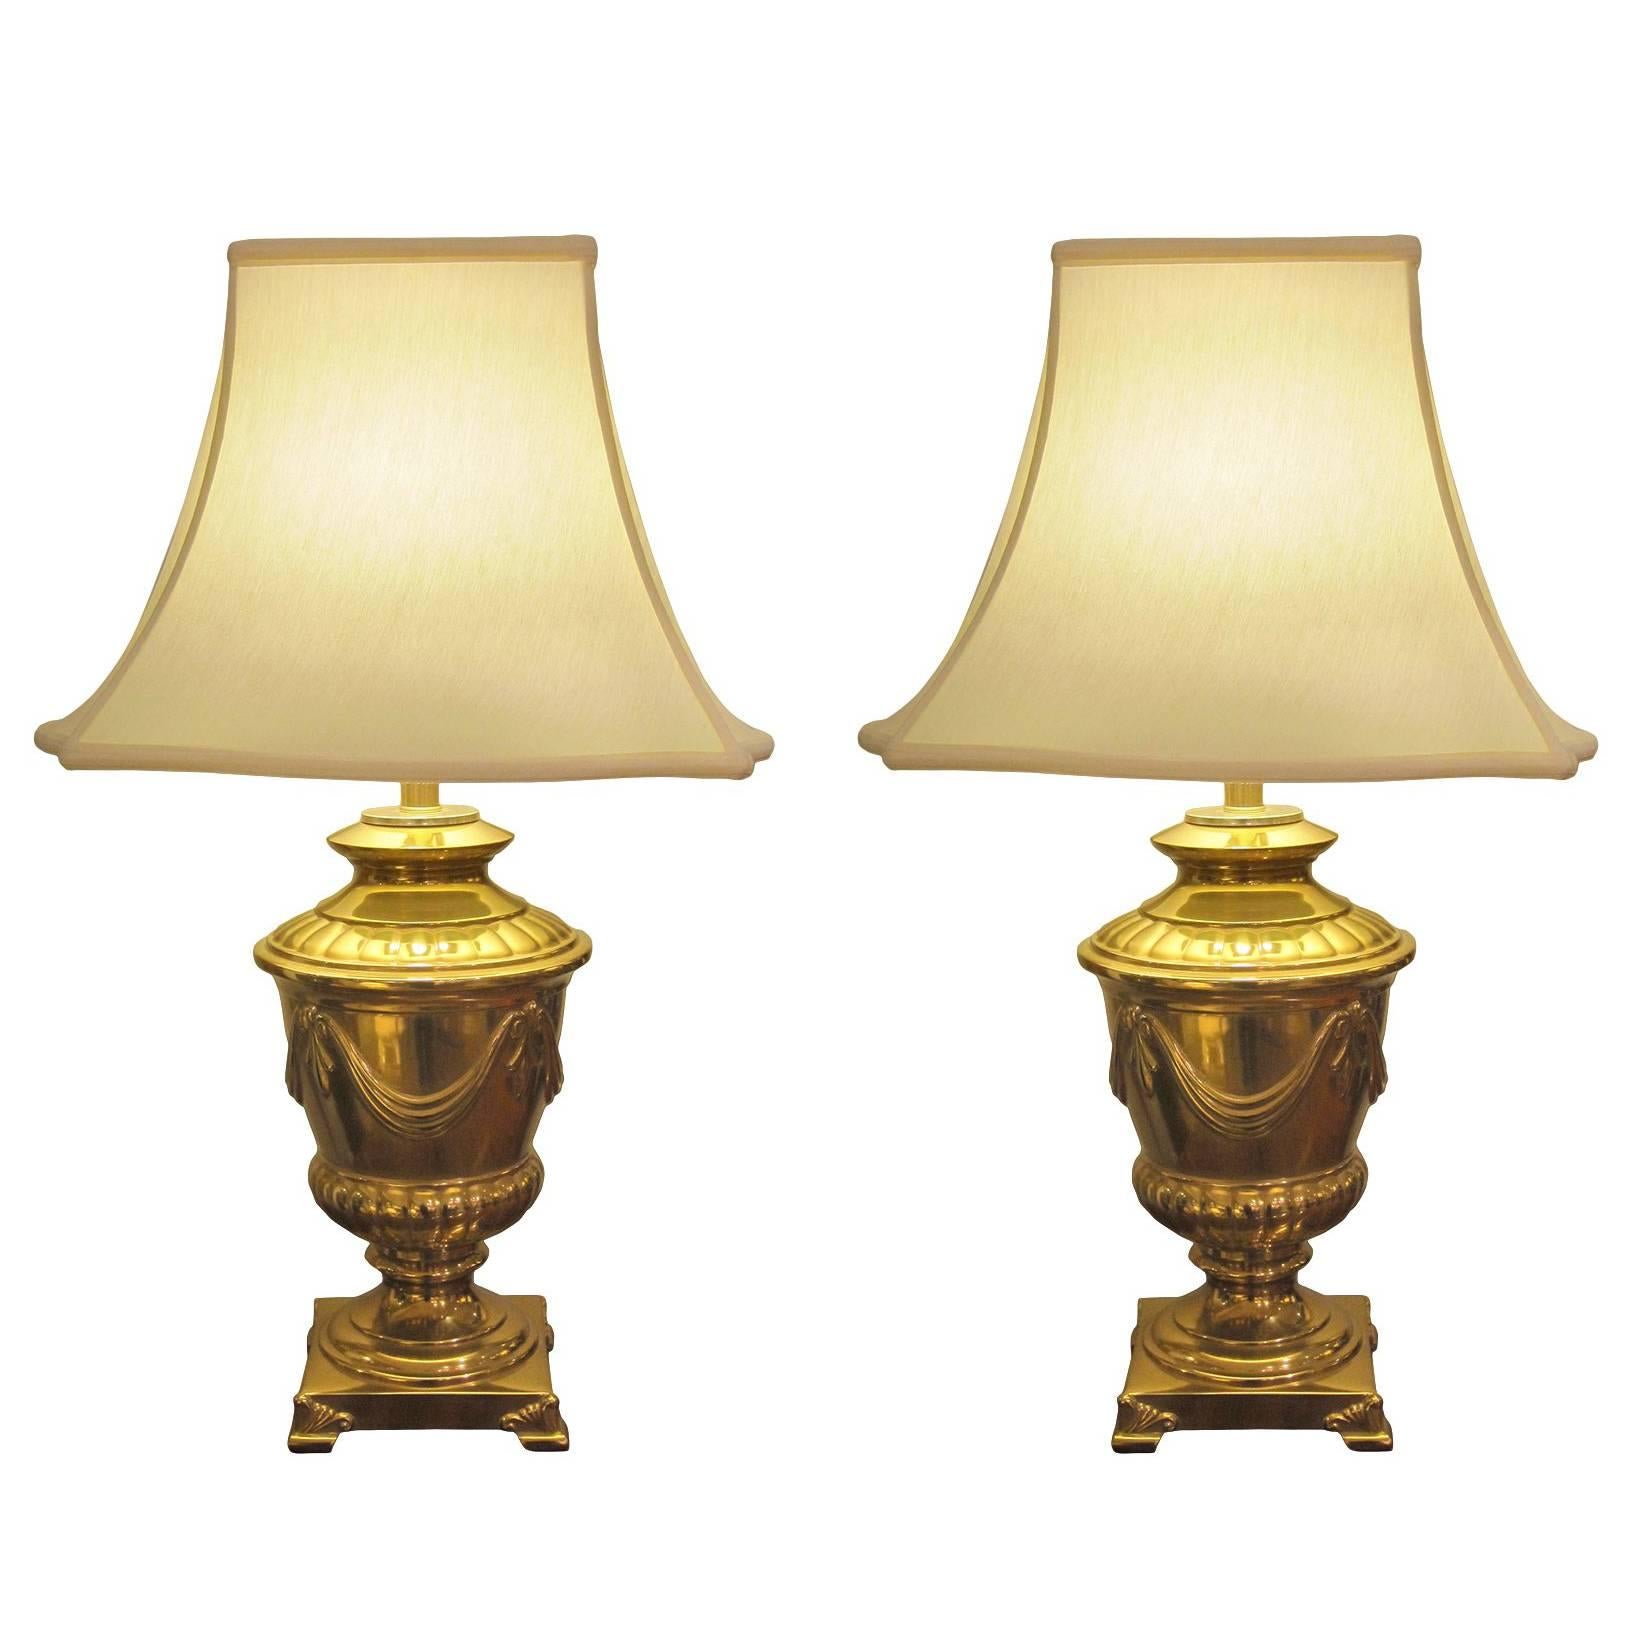 Good Quality Pair of American Frederick Cooper Campagna-Form Solid Brass Lamps